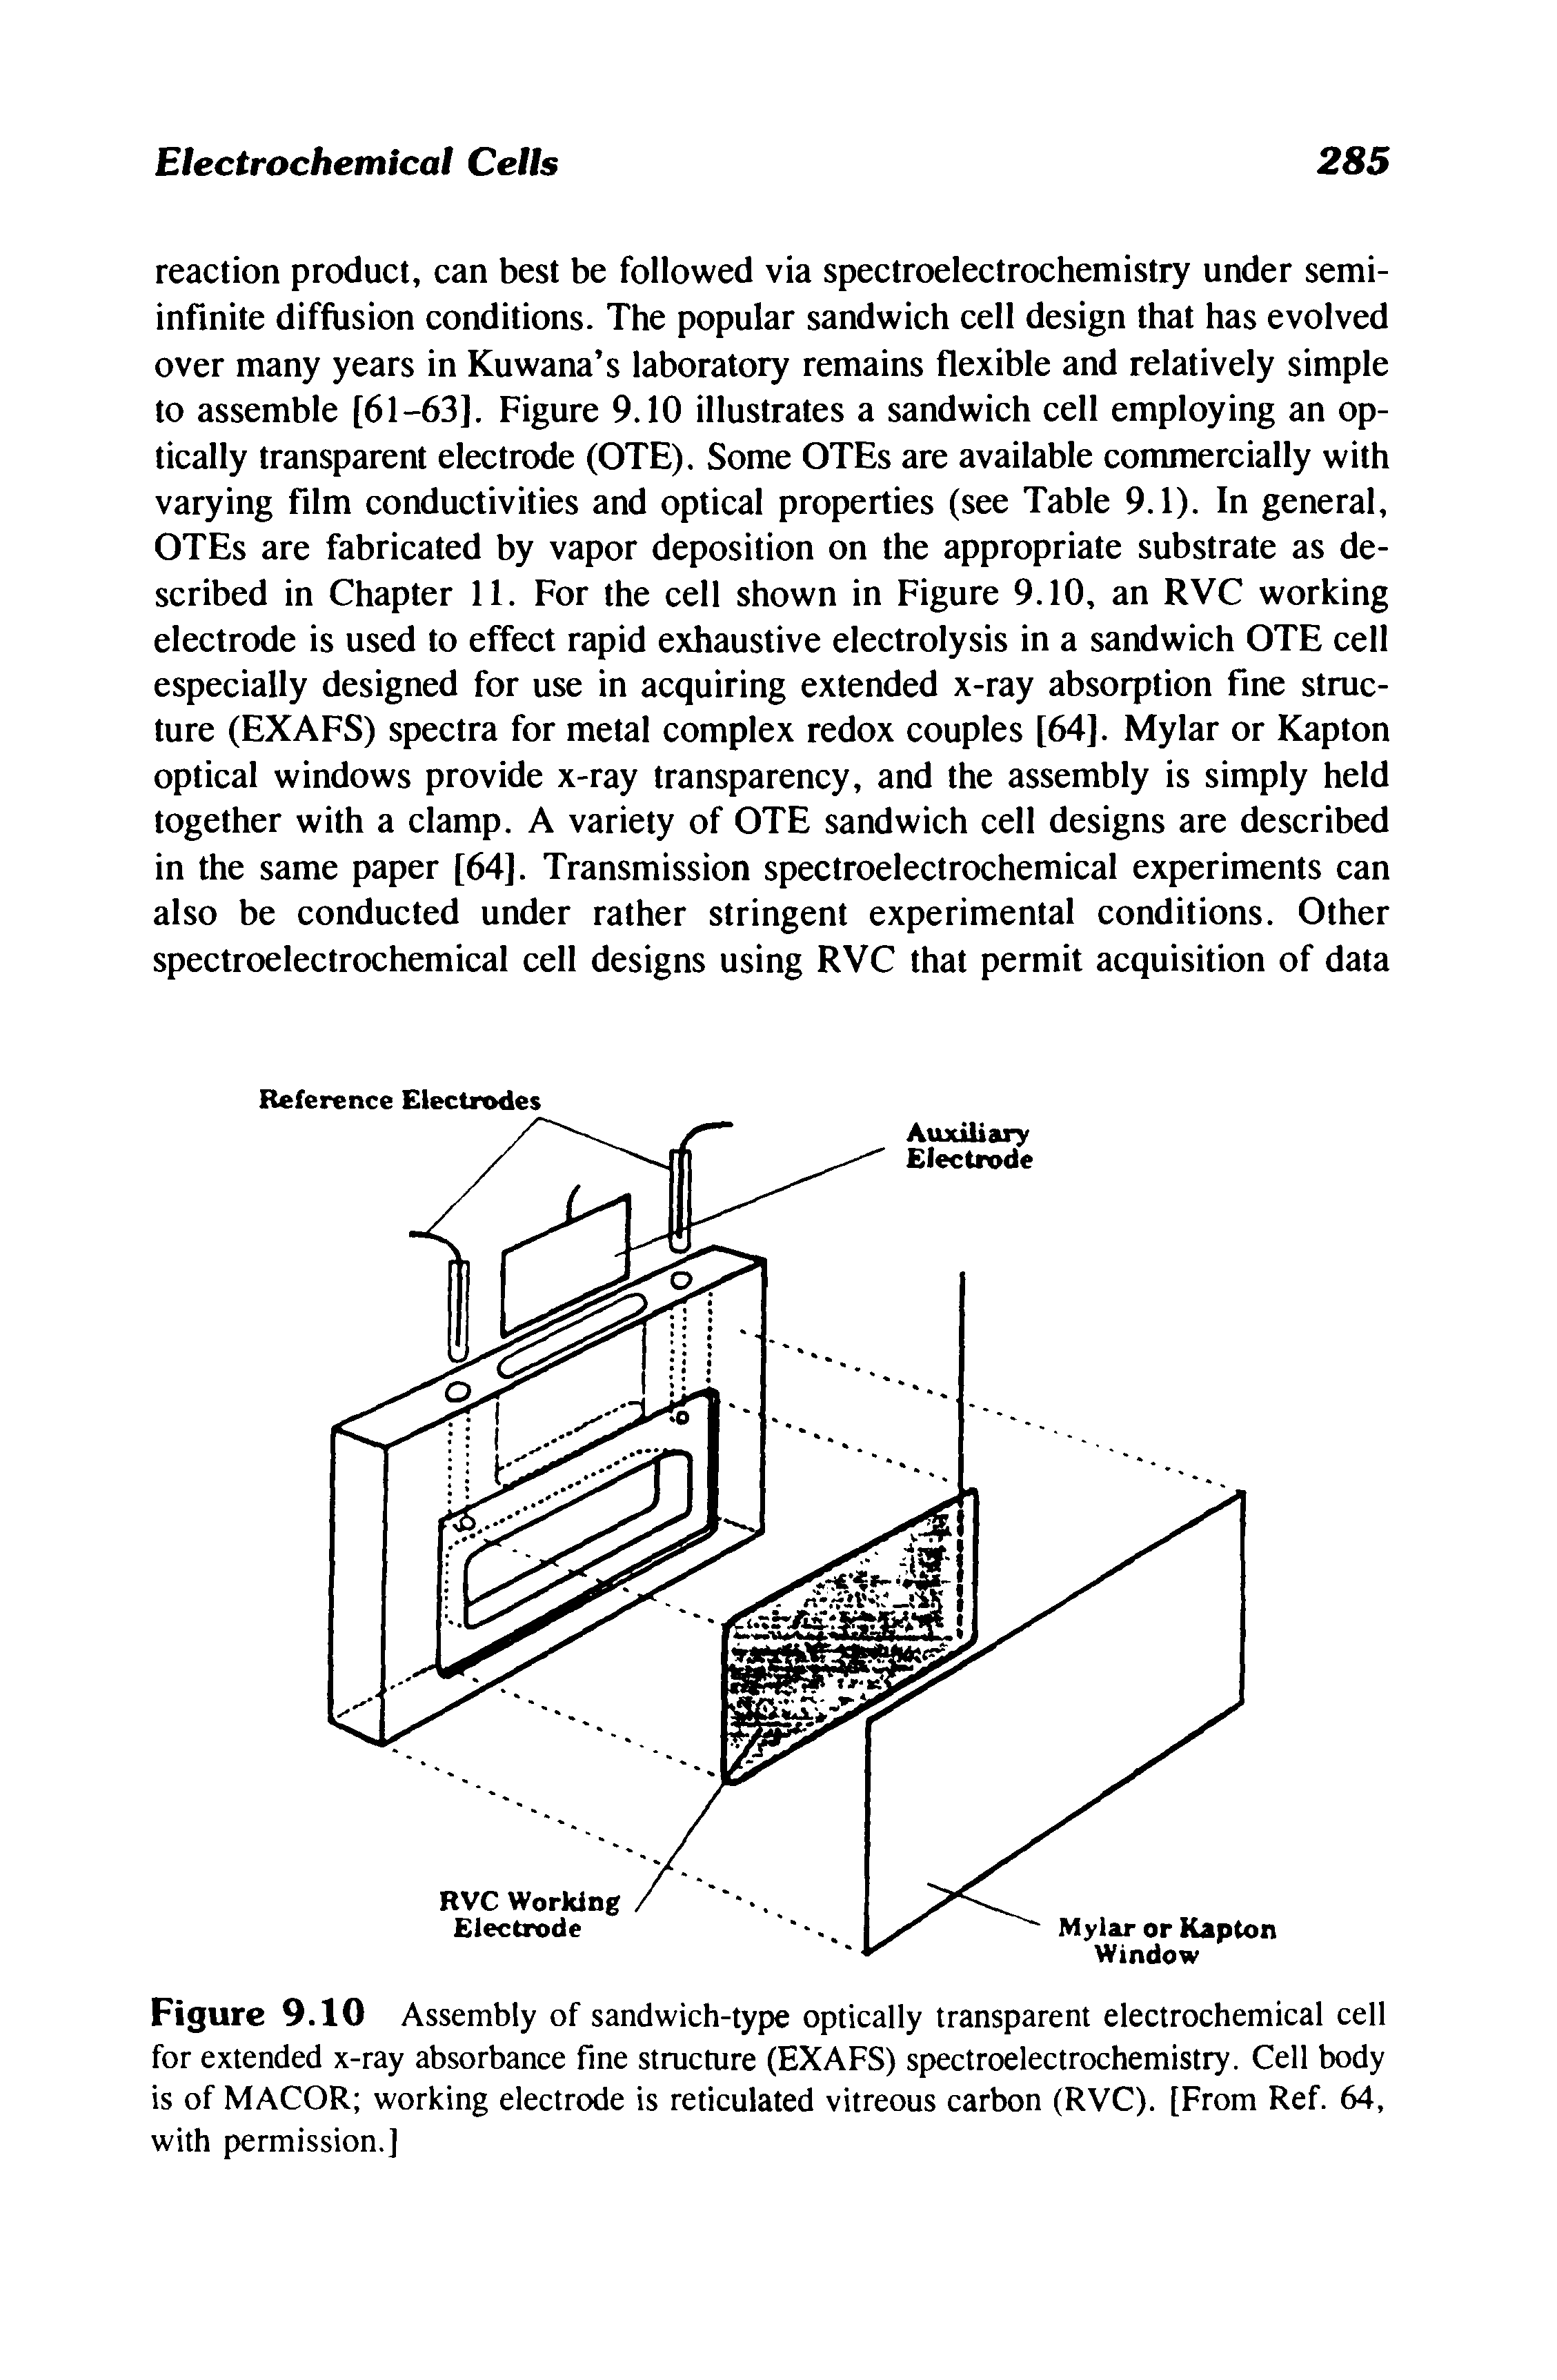 Figure 9.10 Assembly of sandwich-type optically transparent electrochemical cell for extended x-ray absorbance fine structure (EXAFS) spectroelectrochemistry. Cell body is of MACOR working electrode is reticulated vitreous carbon (RVC). [From Ref. 64, with permission.]...